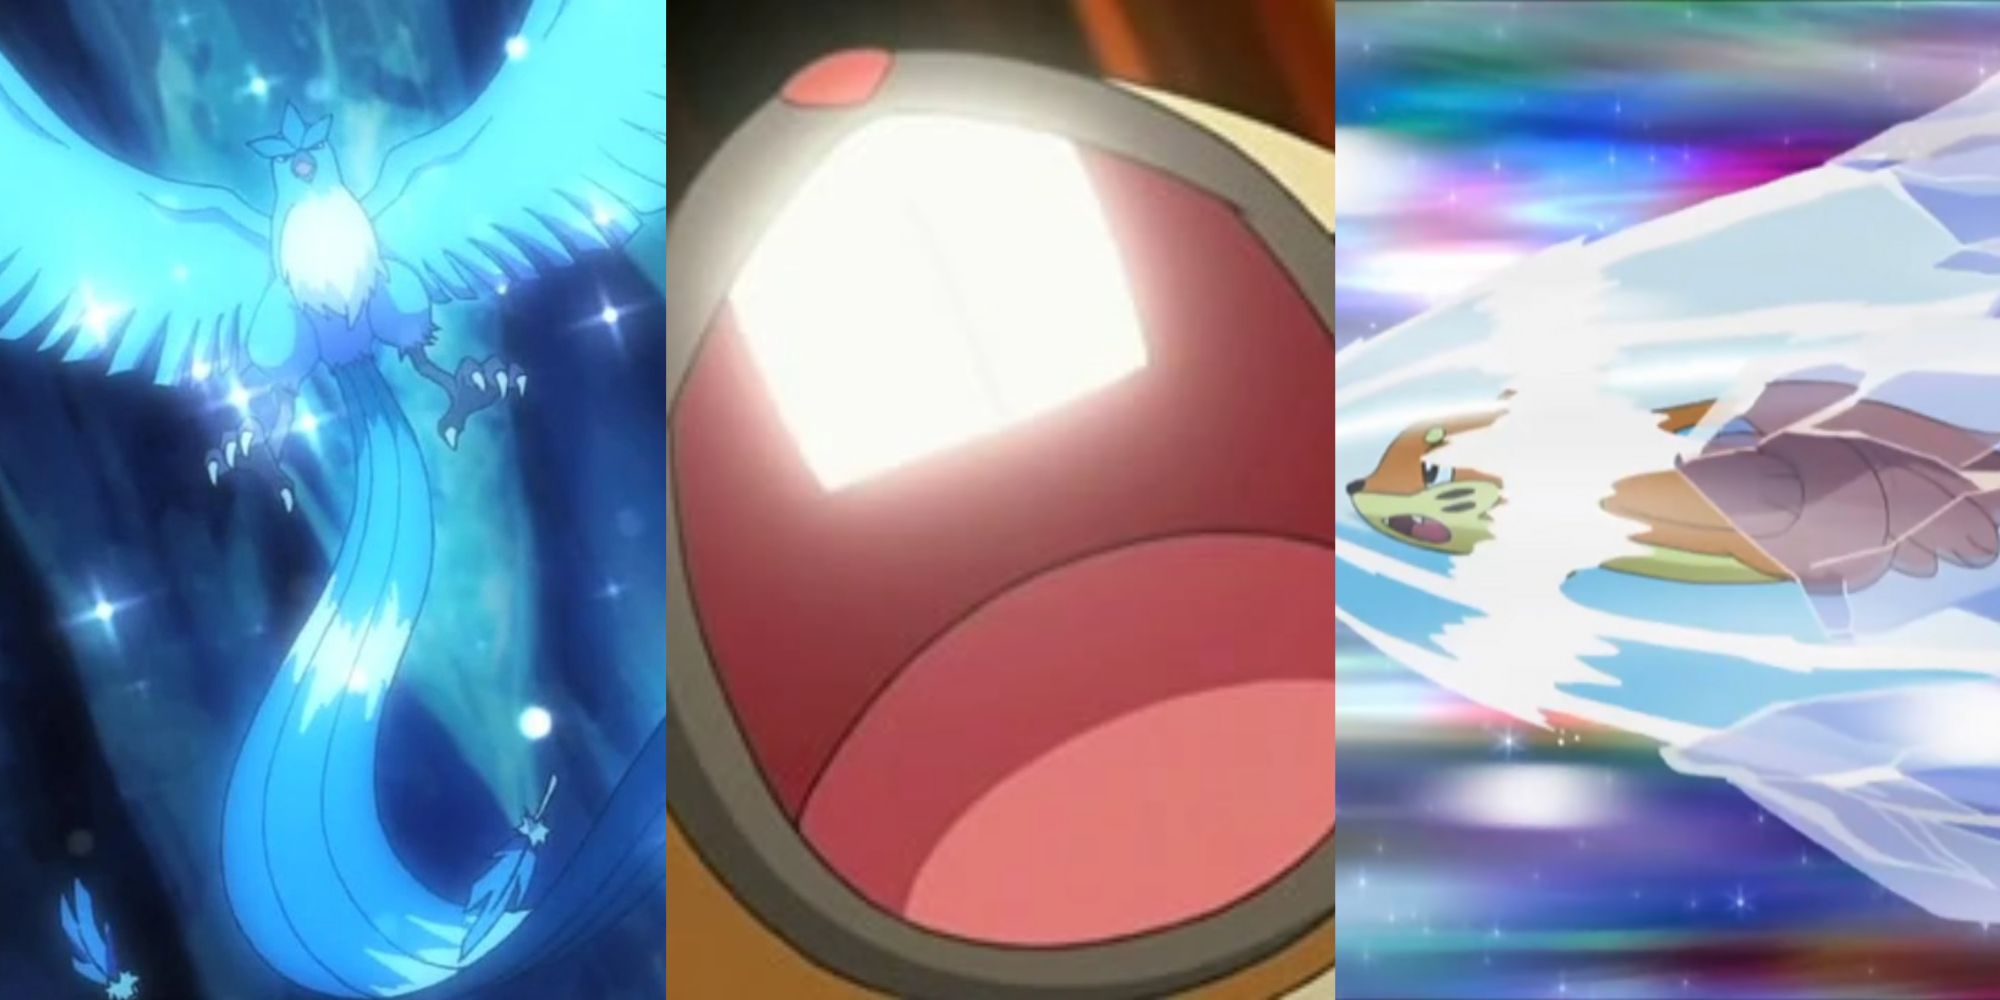 Articuno glowing blue in front of a blue sparkly background, a close up of Bibarel's open mouth and glowing teeth, and Buizel flying within a large stream of water during Aqua Jet in Pokemon